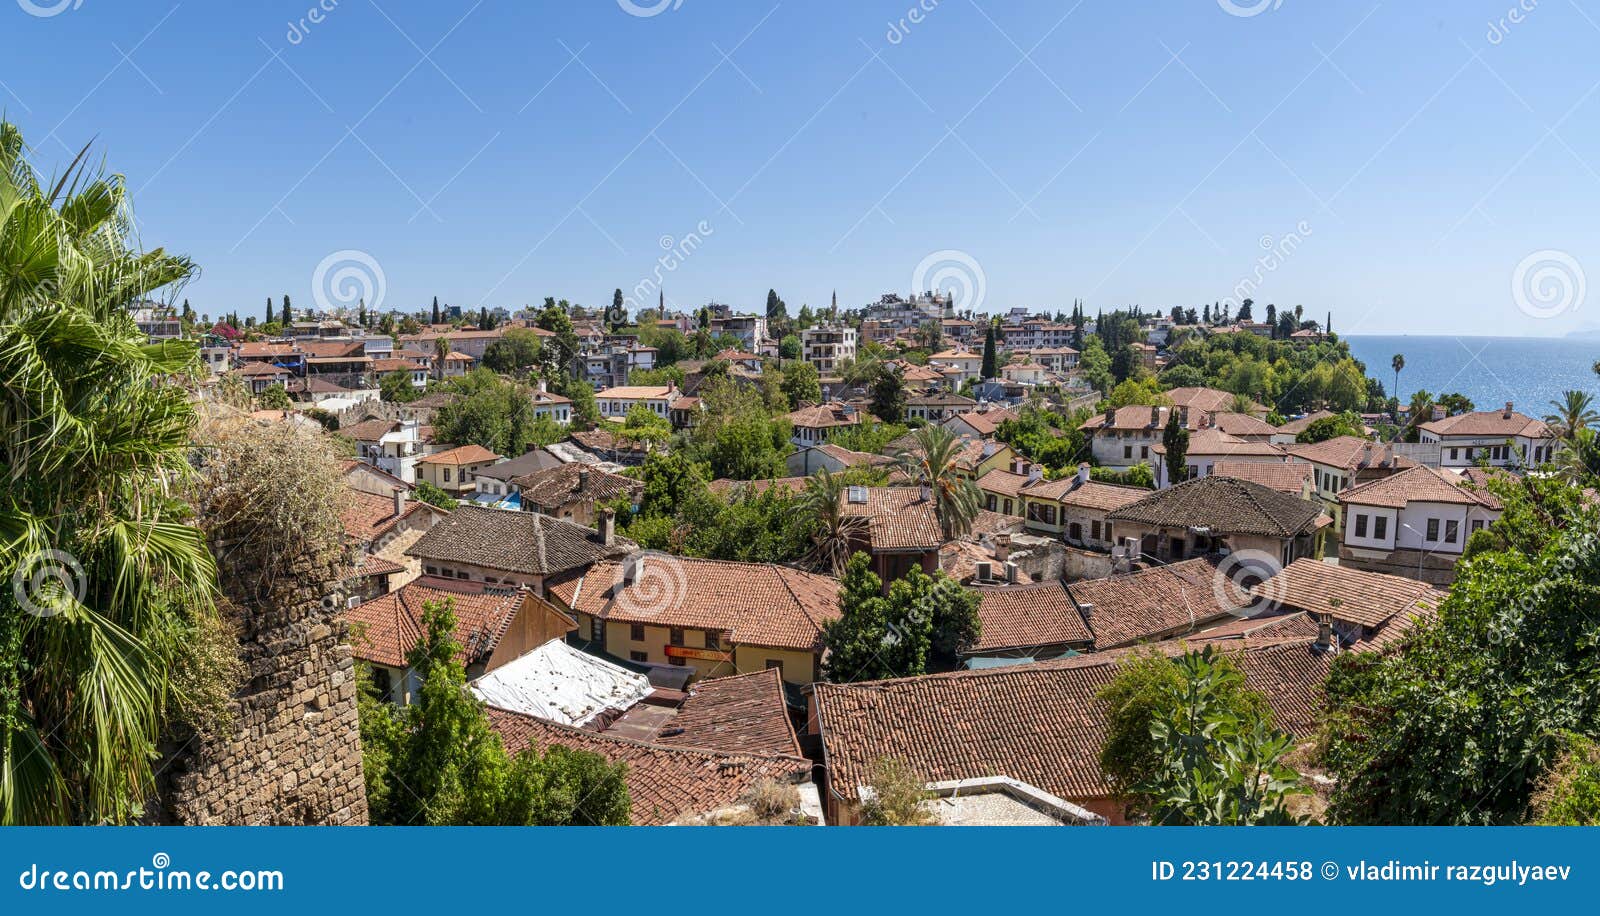 old roofs of houses, the old kaleichi district in antalya. panorama. the historical center of antalya, where there are many small